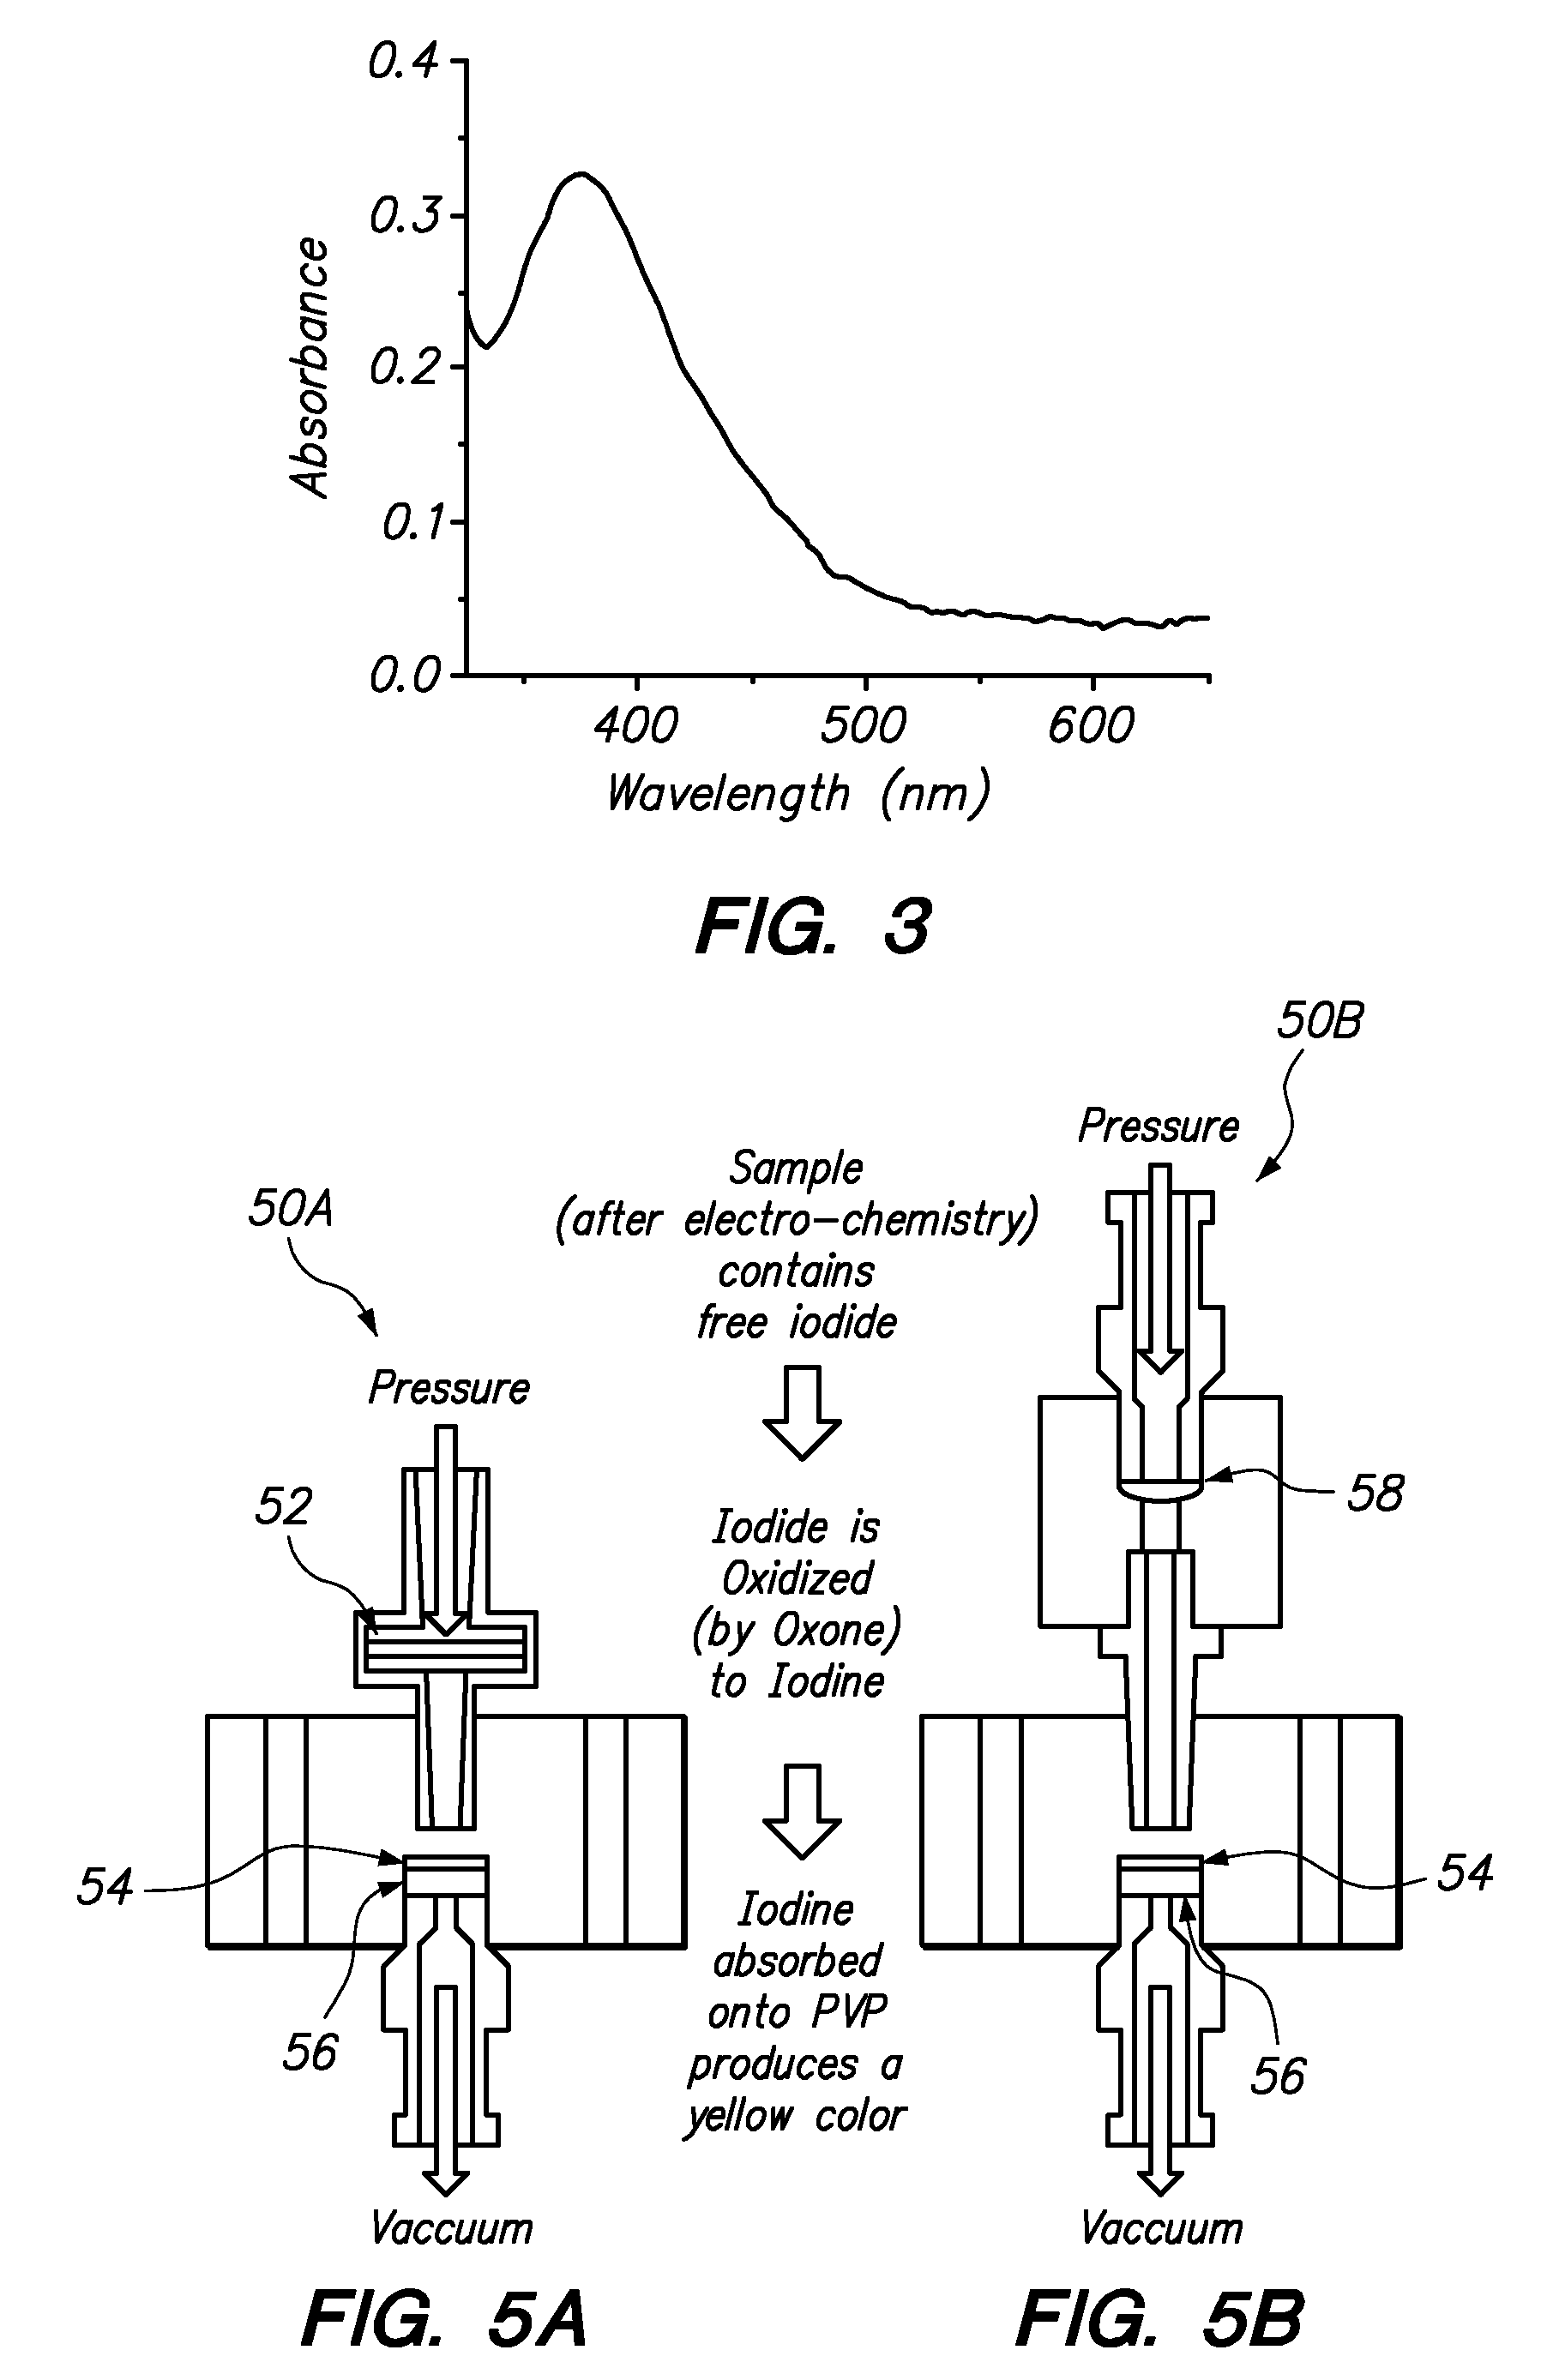 Apparatus and Method for Determining The Concentration of Iodine-Containing Organic Compounds in an Aqueous Solution